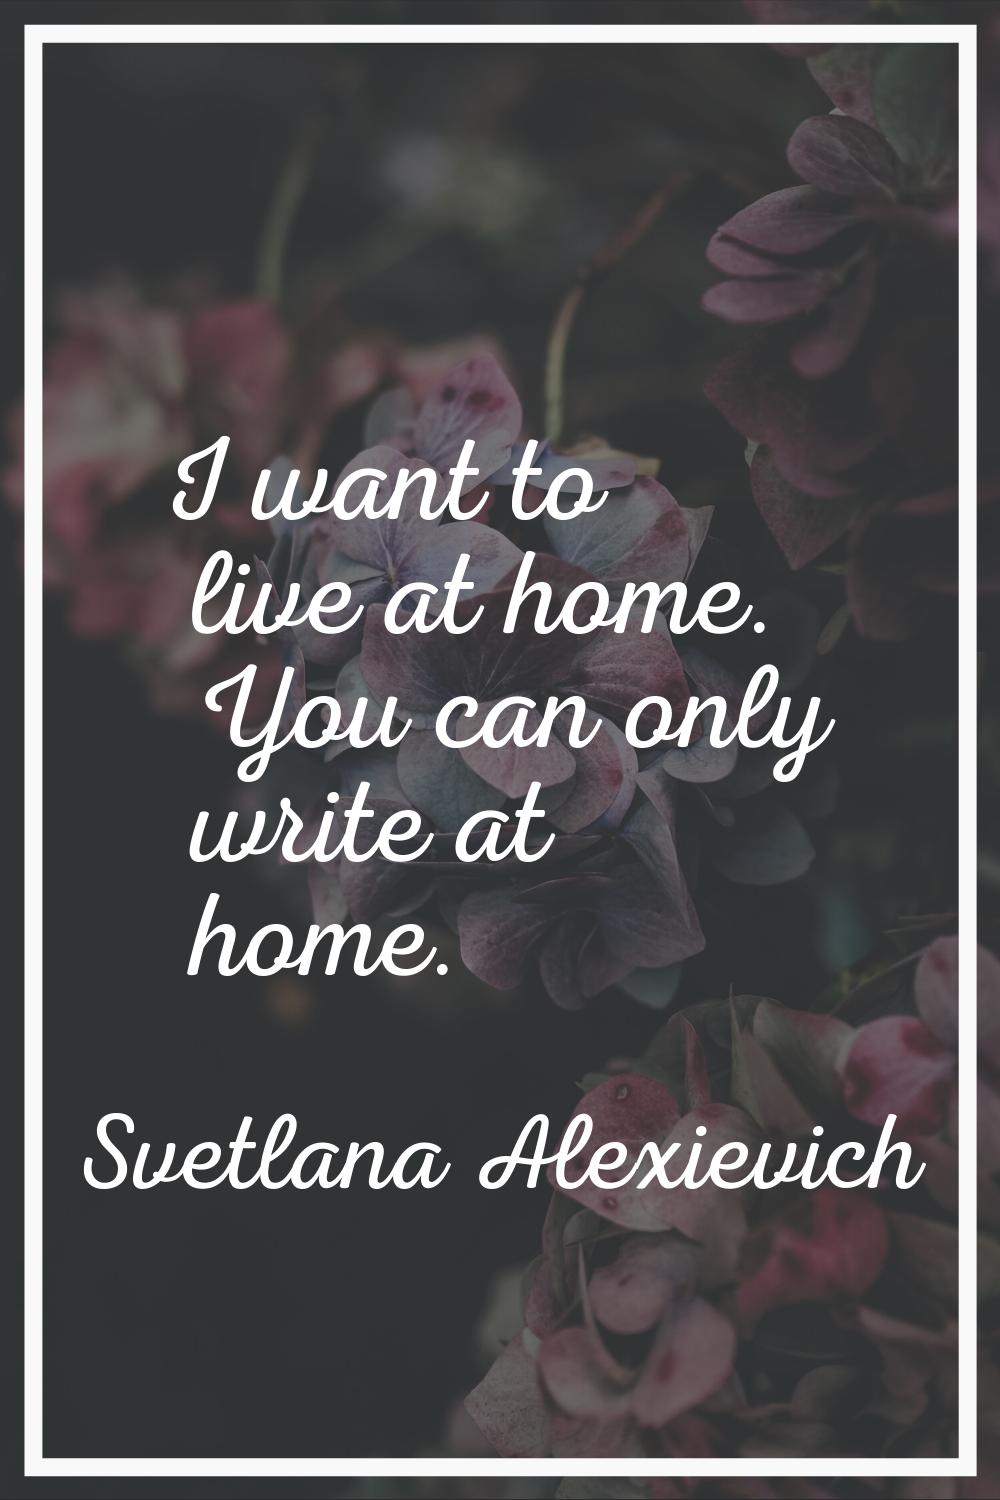 I want to live at home. You can only write at home.